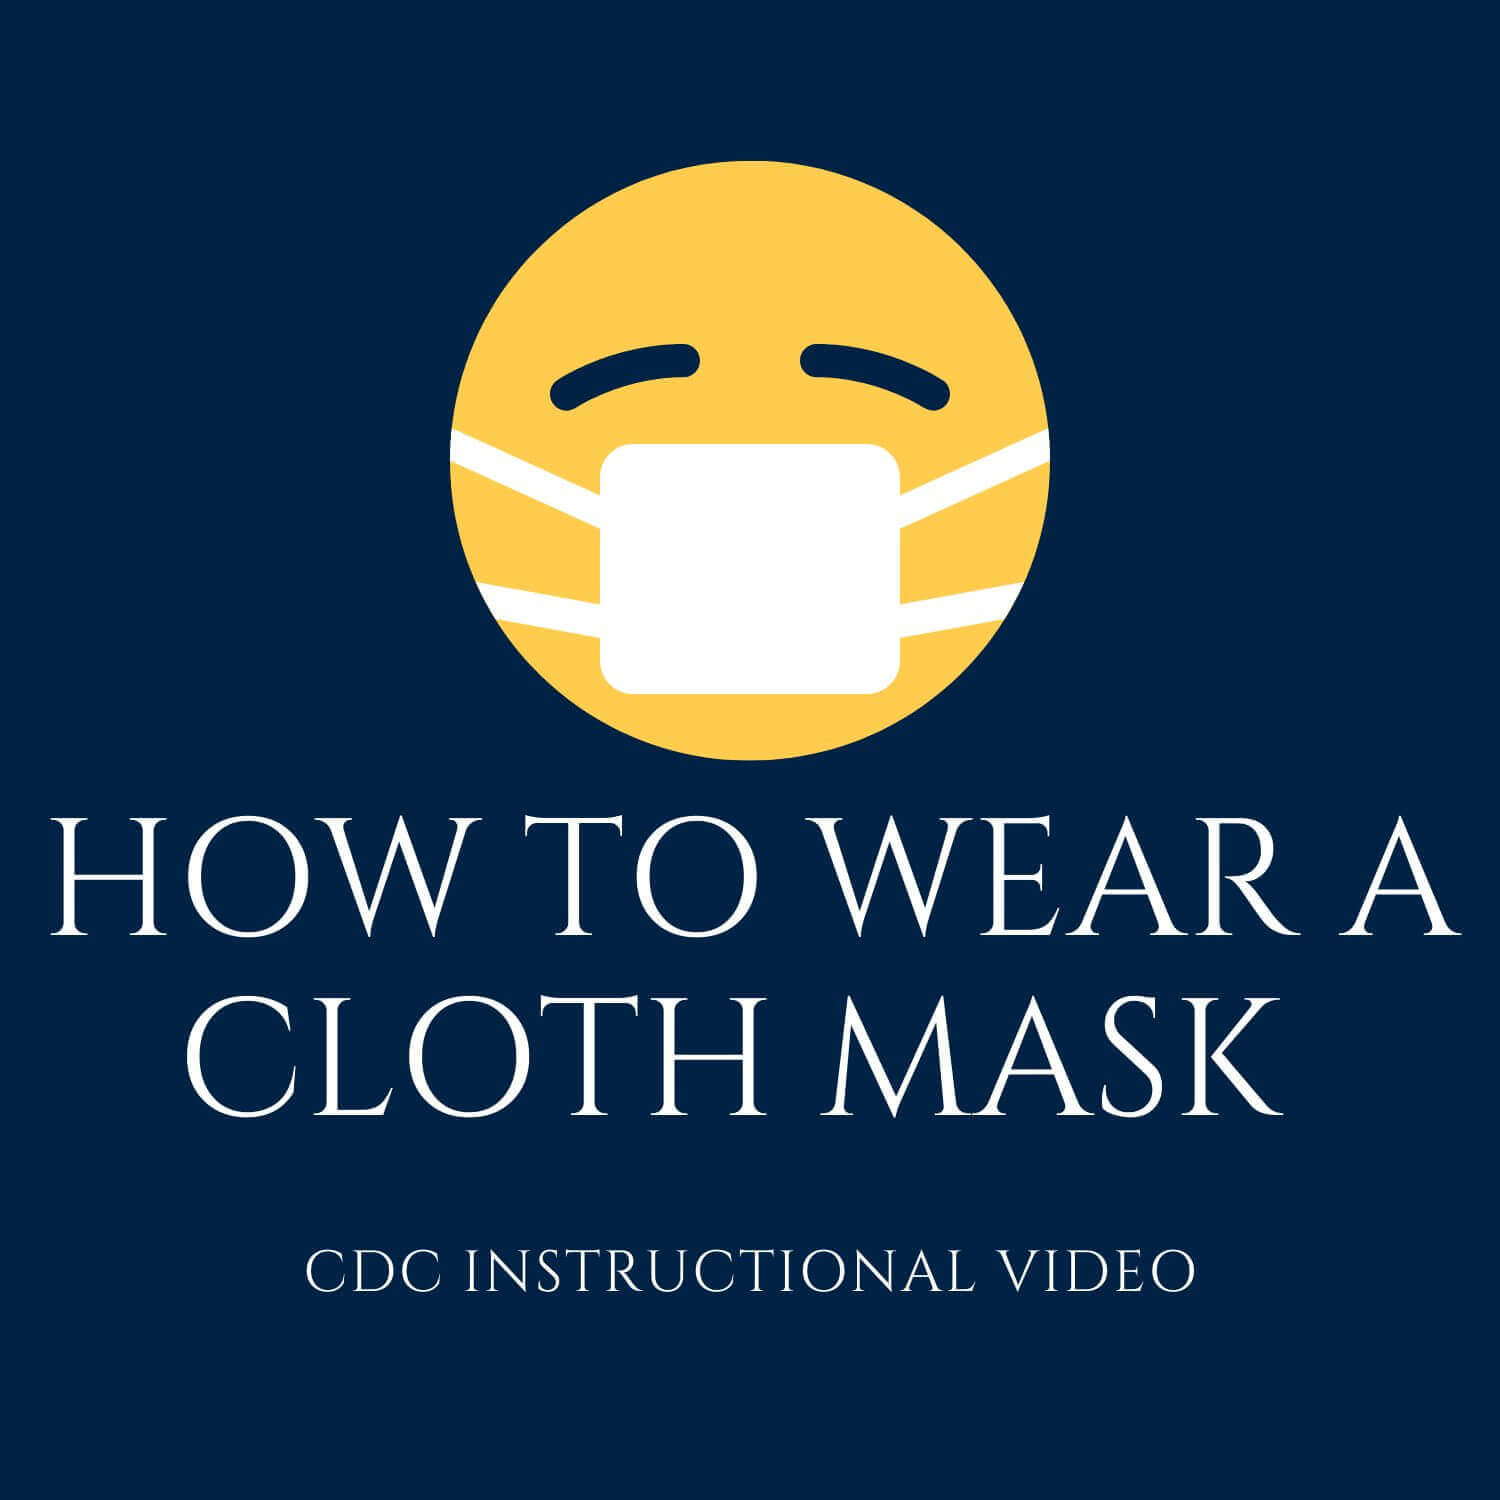 How to Wear a Cloth Mask Vector Image for Button Link to CDC Instructional Video